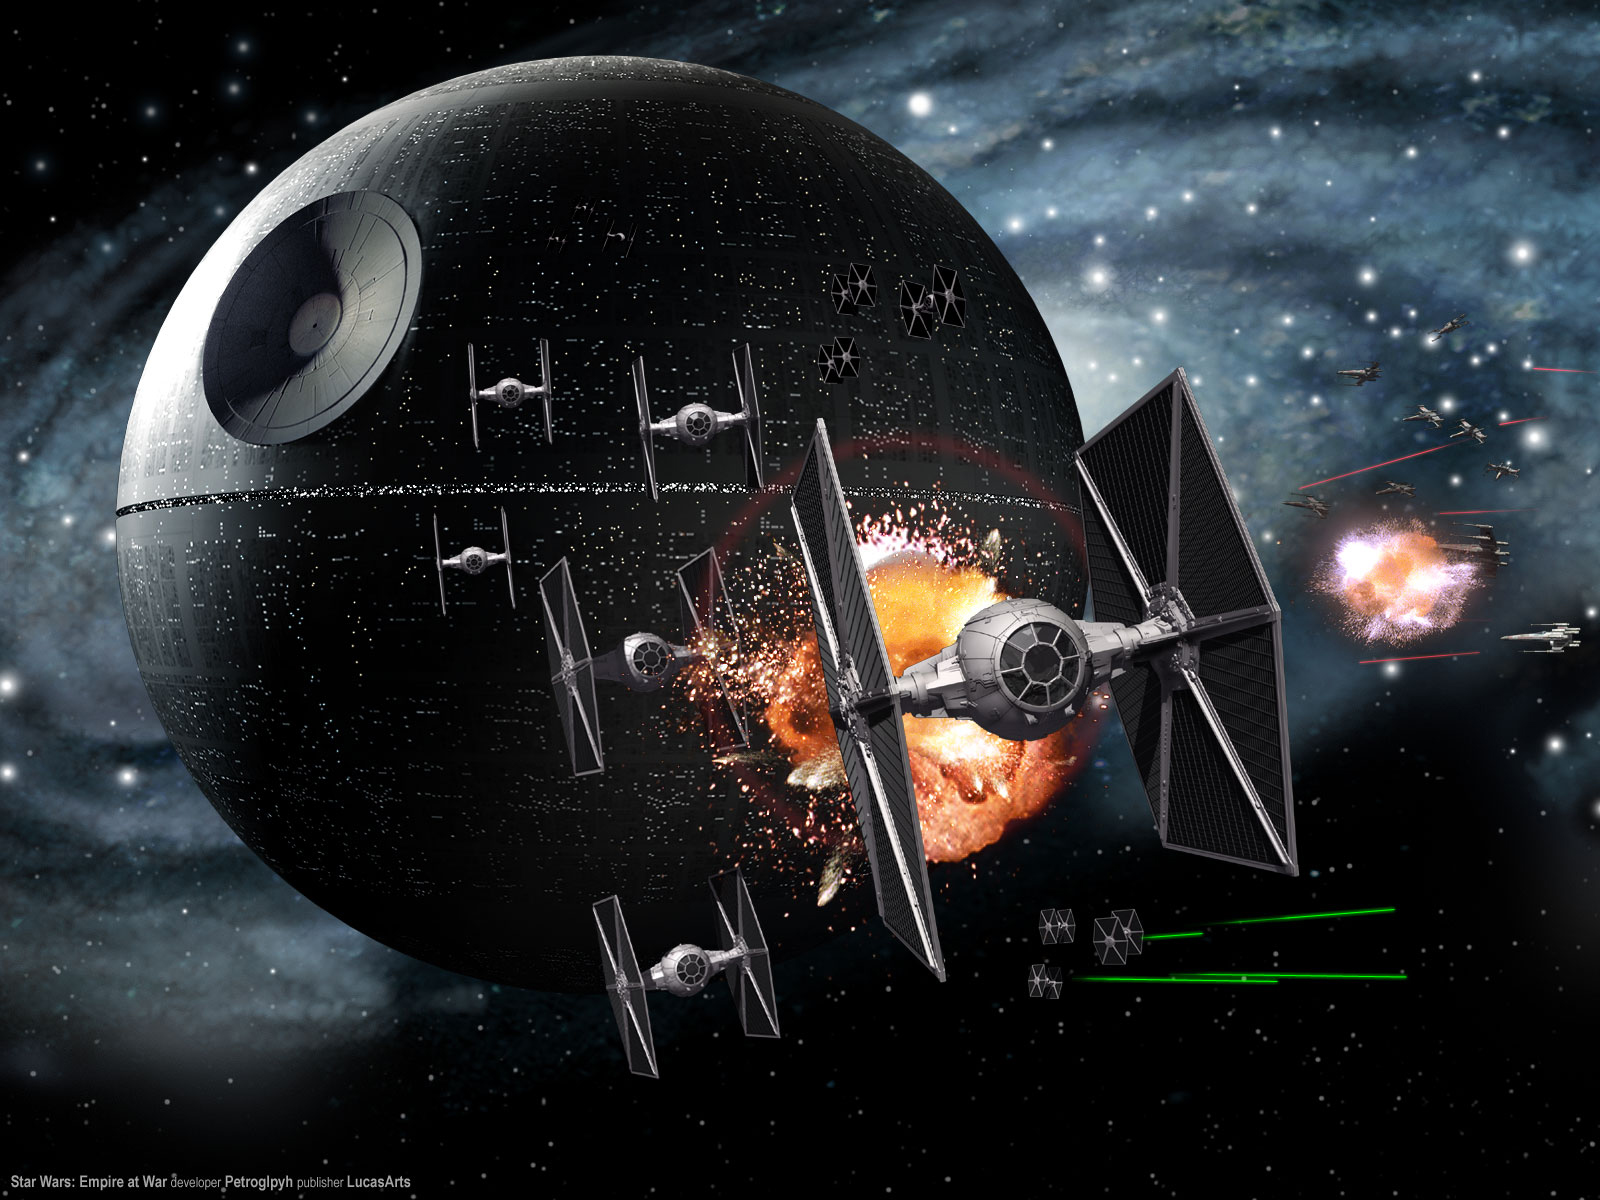 Star Wars Video Games Star Wars Empire At War TiE Fighter Death Star 2006 Year PC Gaming Imperial Fo 1600x1200